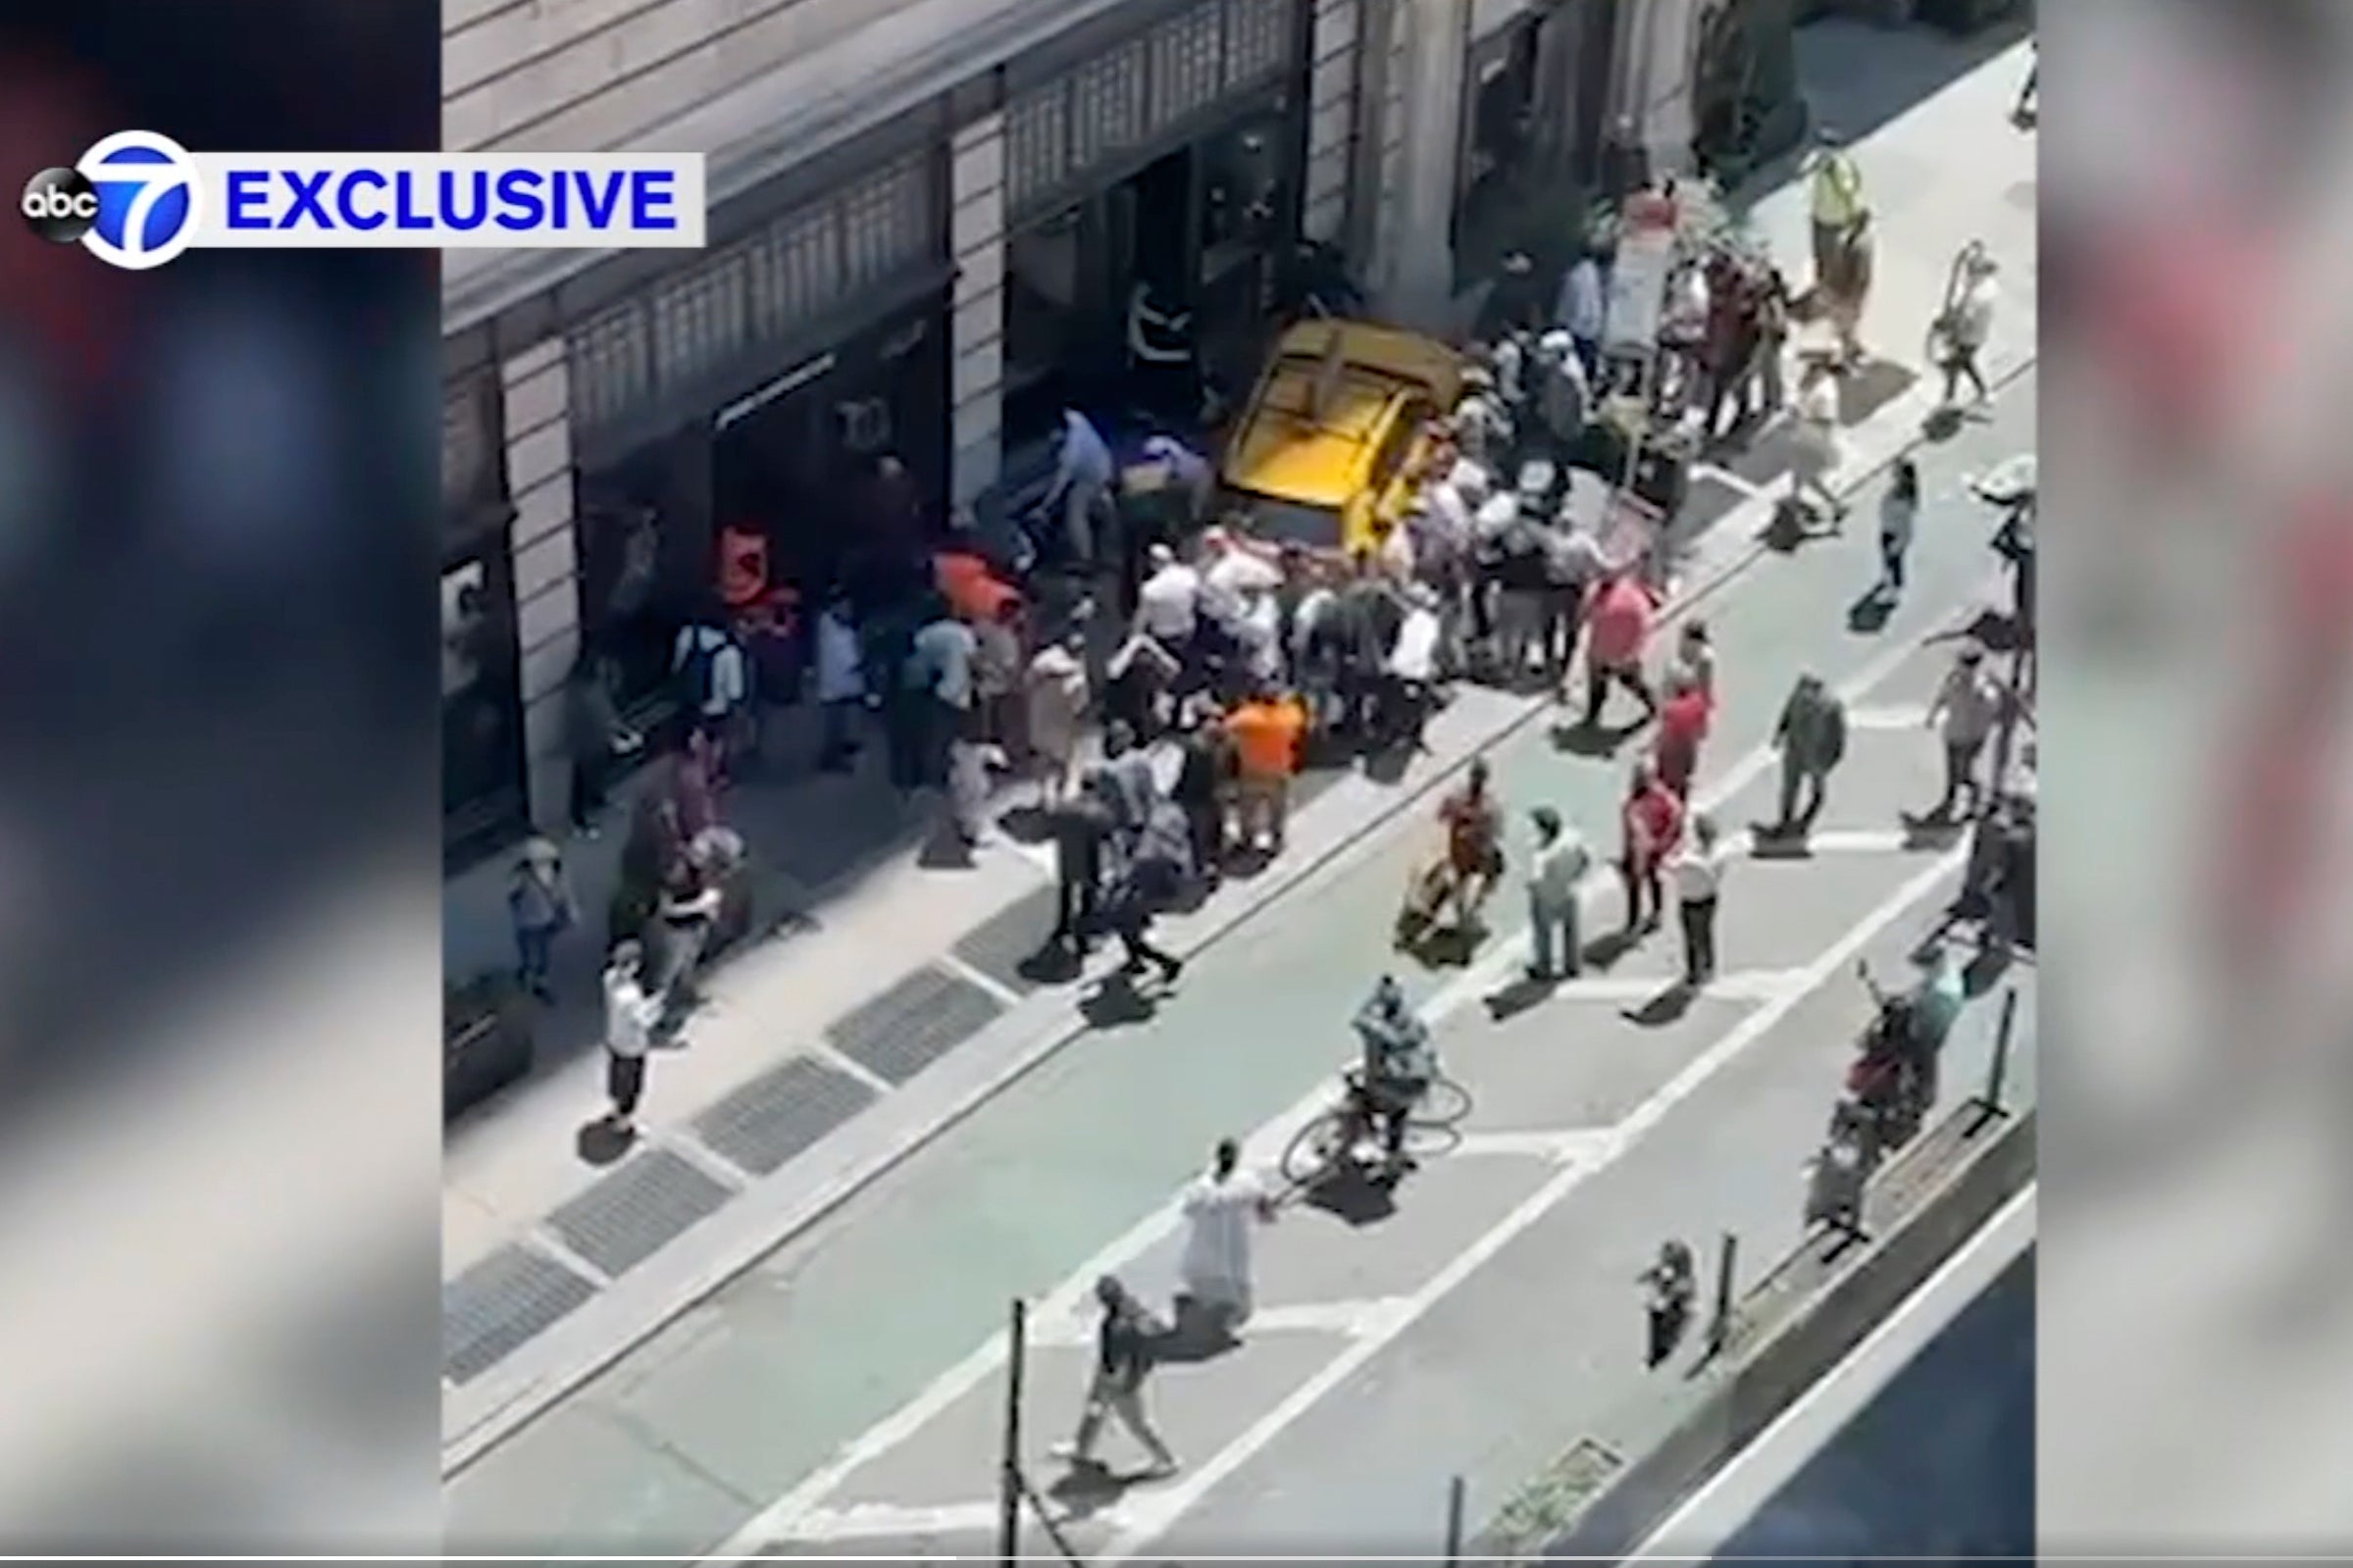 Bystanders move in to assist pedestrians who were struck by a cab that jumped a curb on Broadway